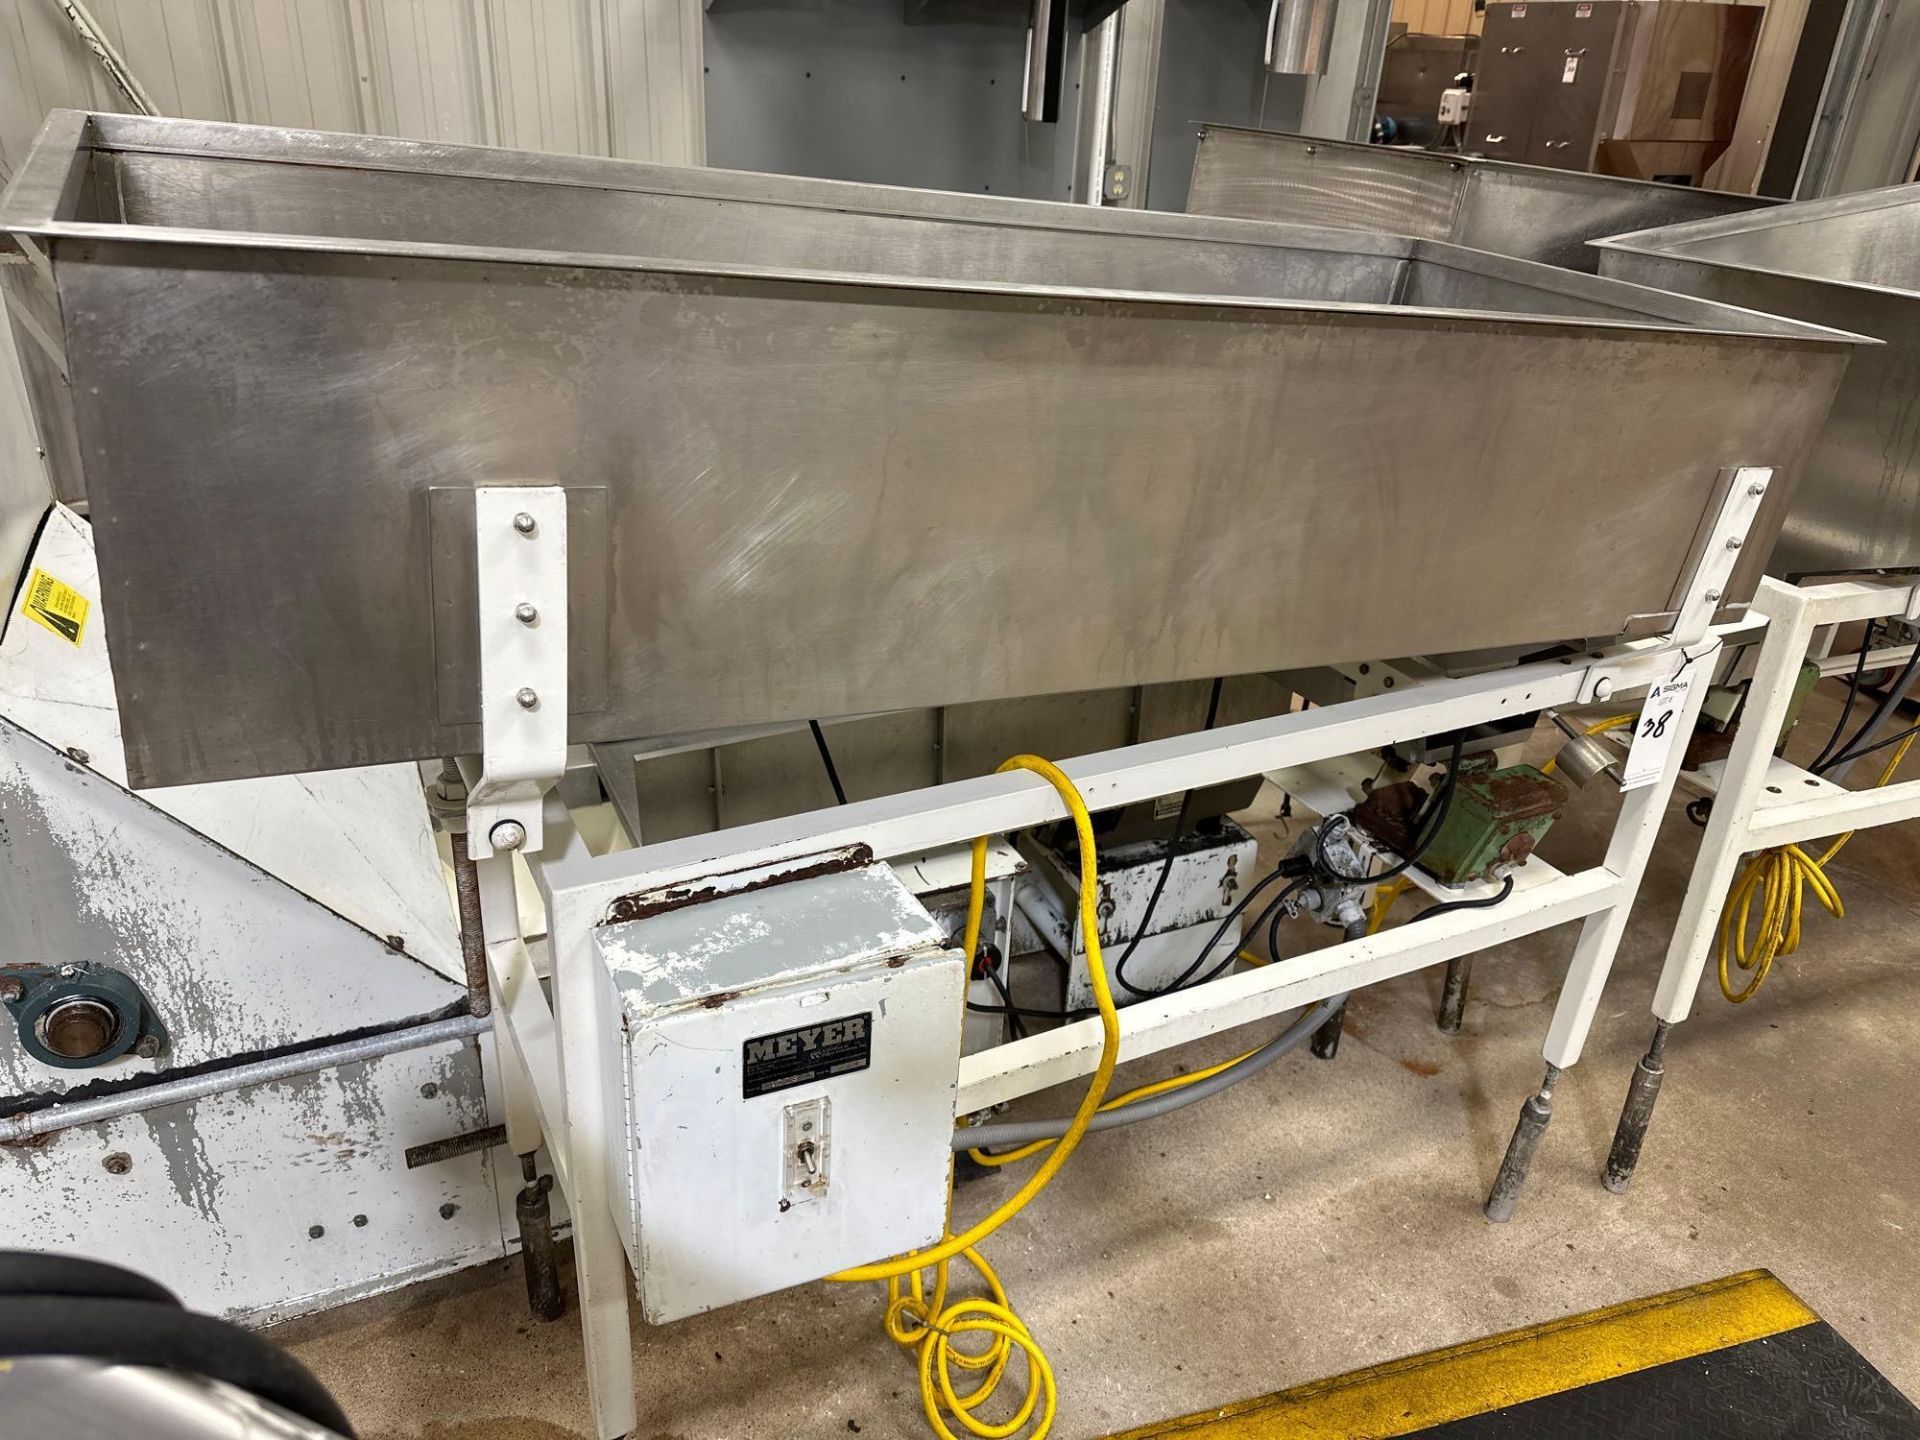 Special Machinery Equipment Stainless Steel 60" x 24" Vibratory Conveyor - Image 2 of 7